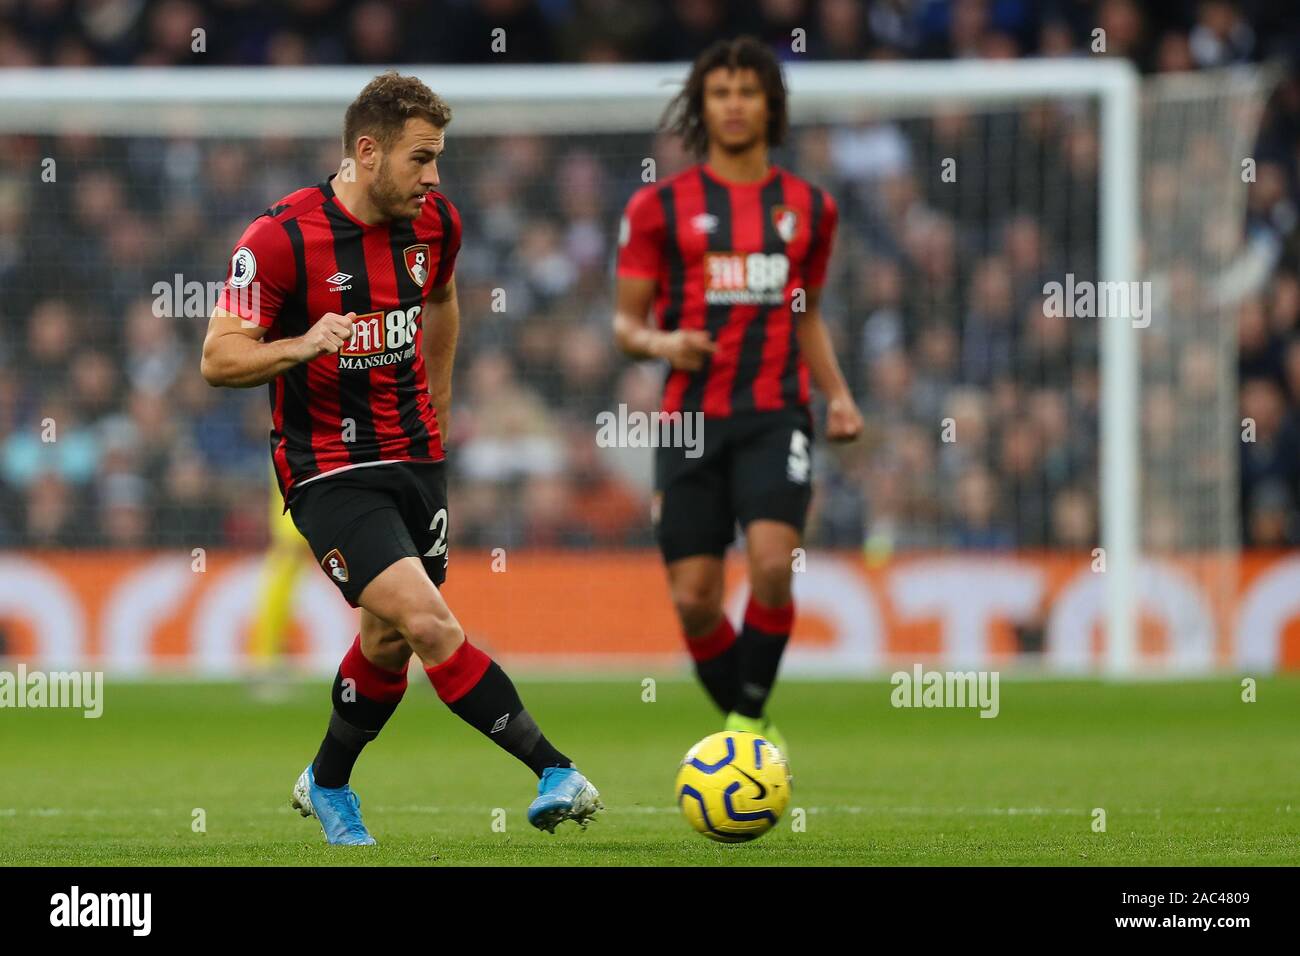 Bournemouth's midfielder Ryan Fraser during the Barclays Premier League match between Tottenham Hotspur and Bournemouth at the Tottenham Hotspur Stadium, London, England. On the 30th November 2019. (Photo by AFS/Espa-Images) Stock Photo